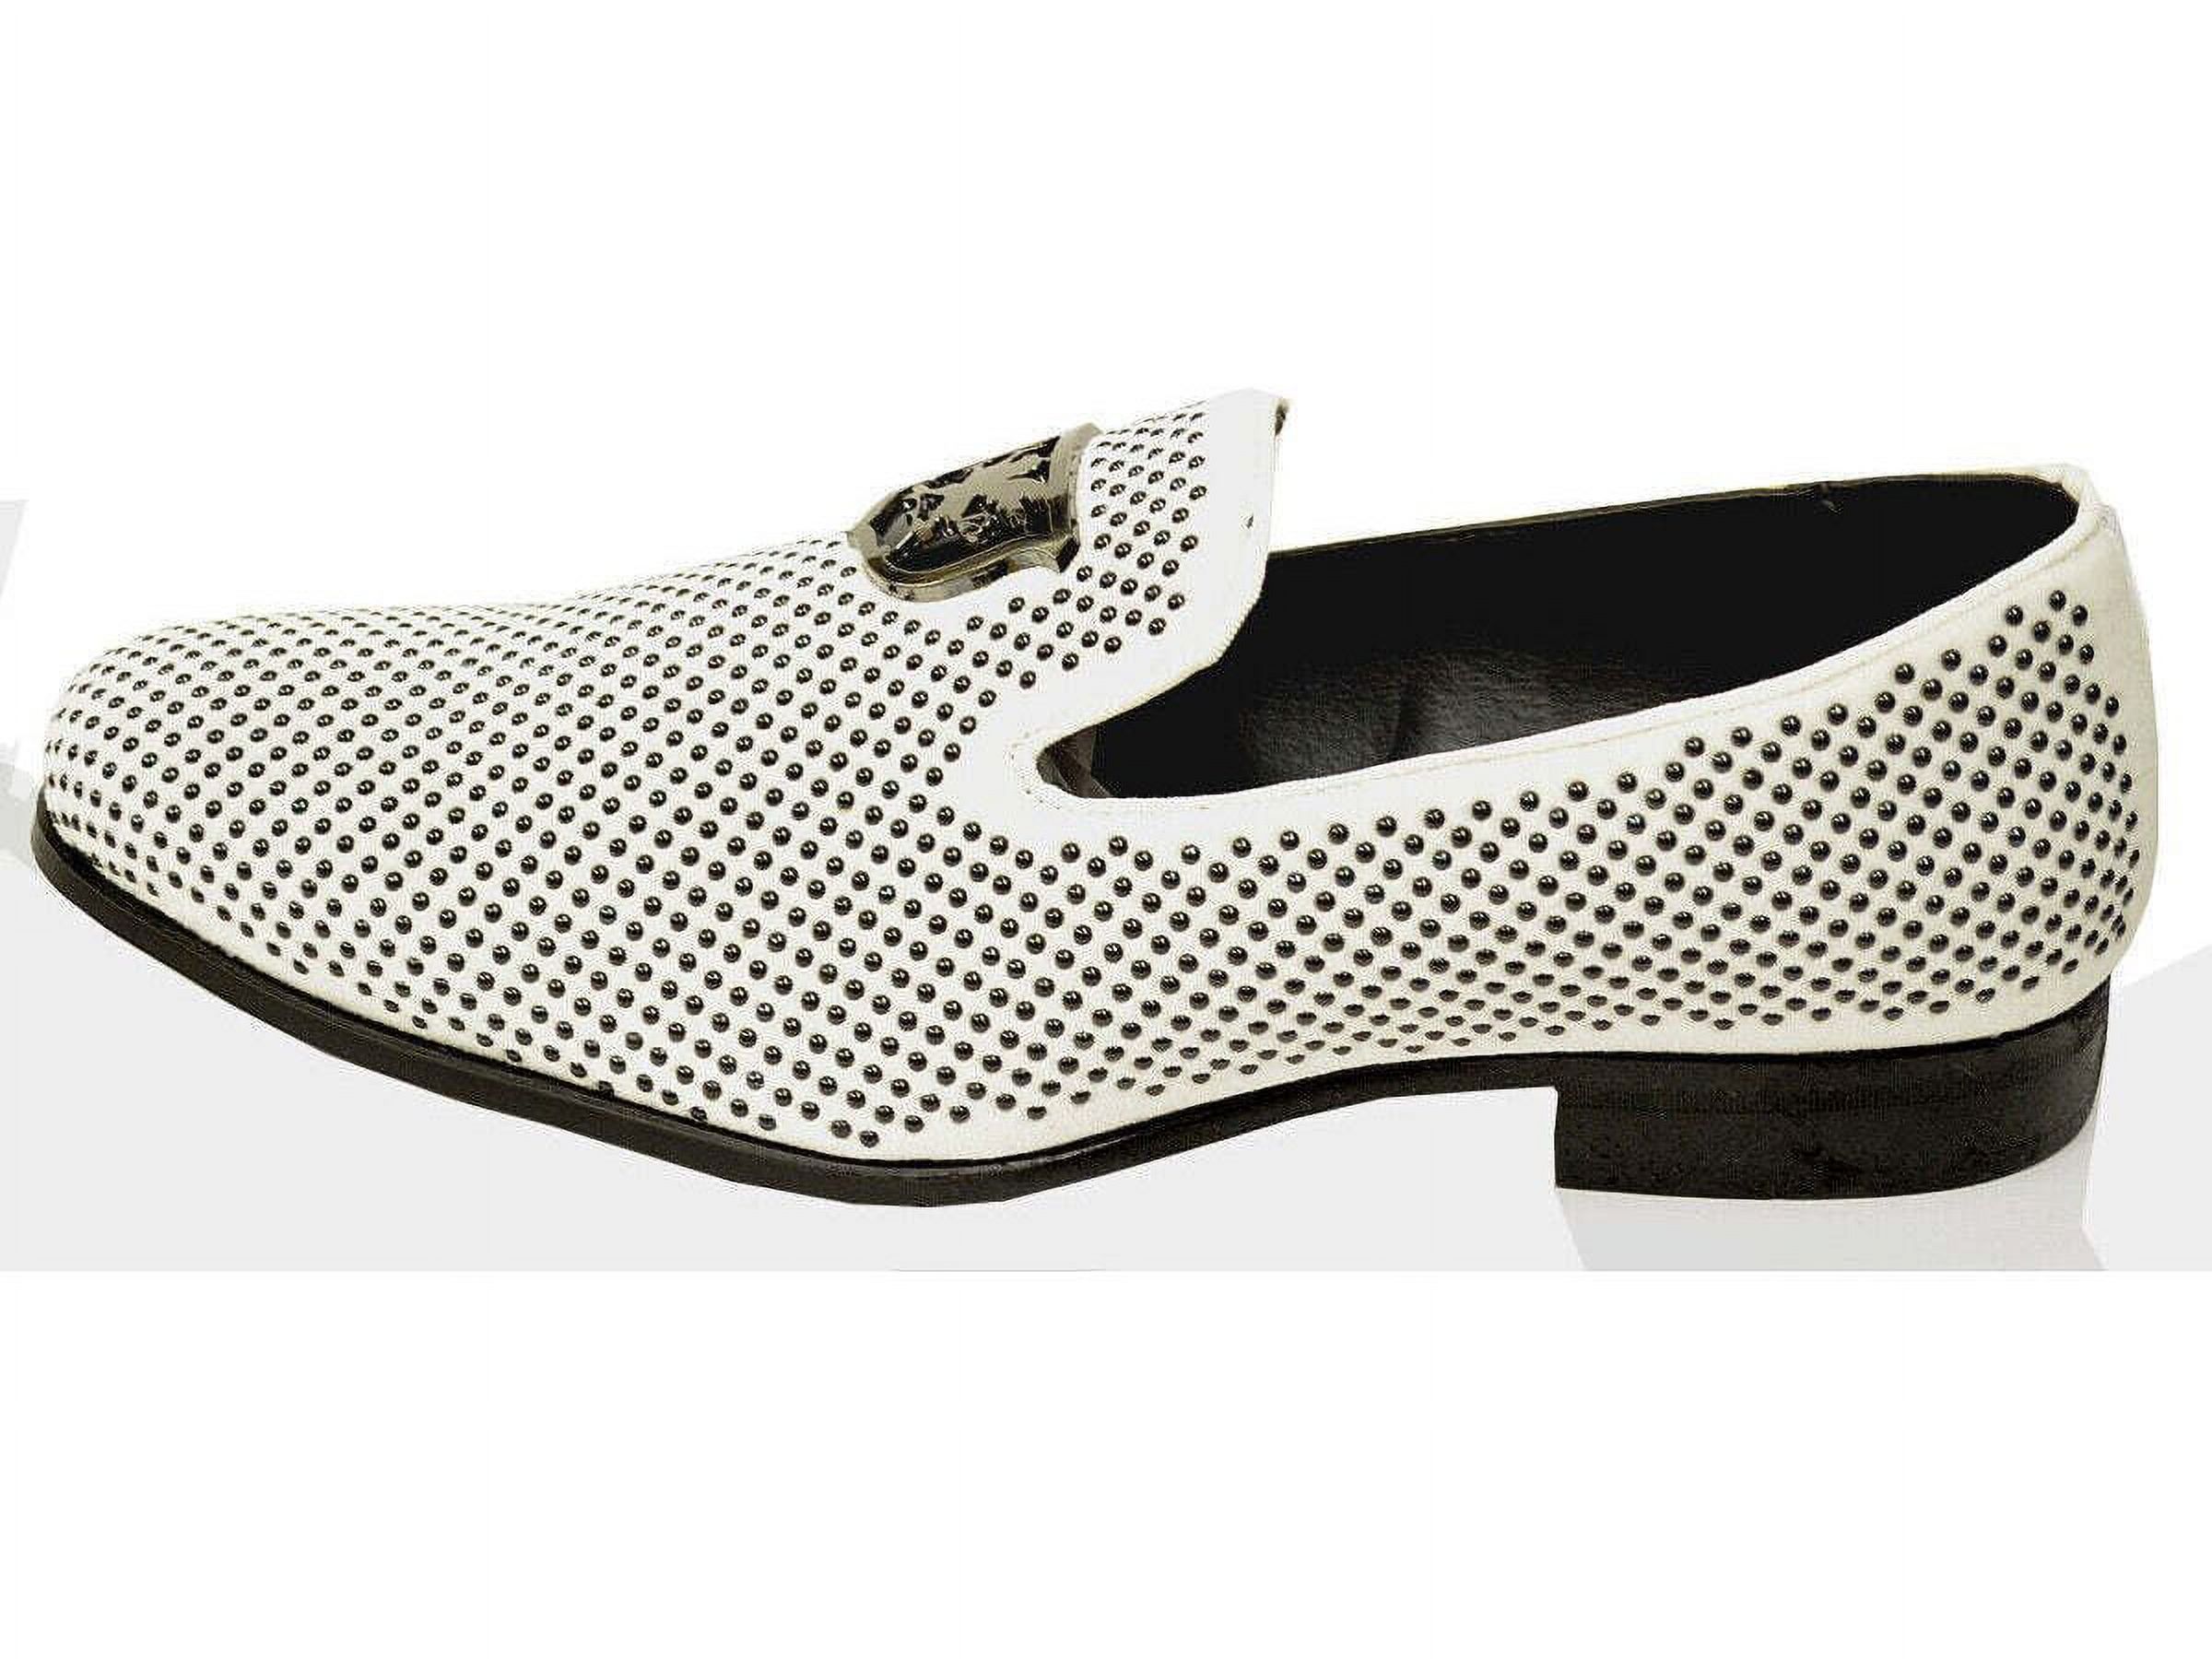 Stacy Adams Men Shoes Swagger Studded Slip On Satin Black White Formal 25228-111 - image 3 of 4